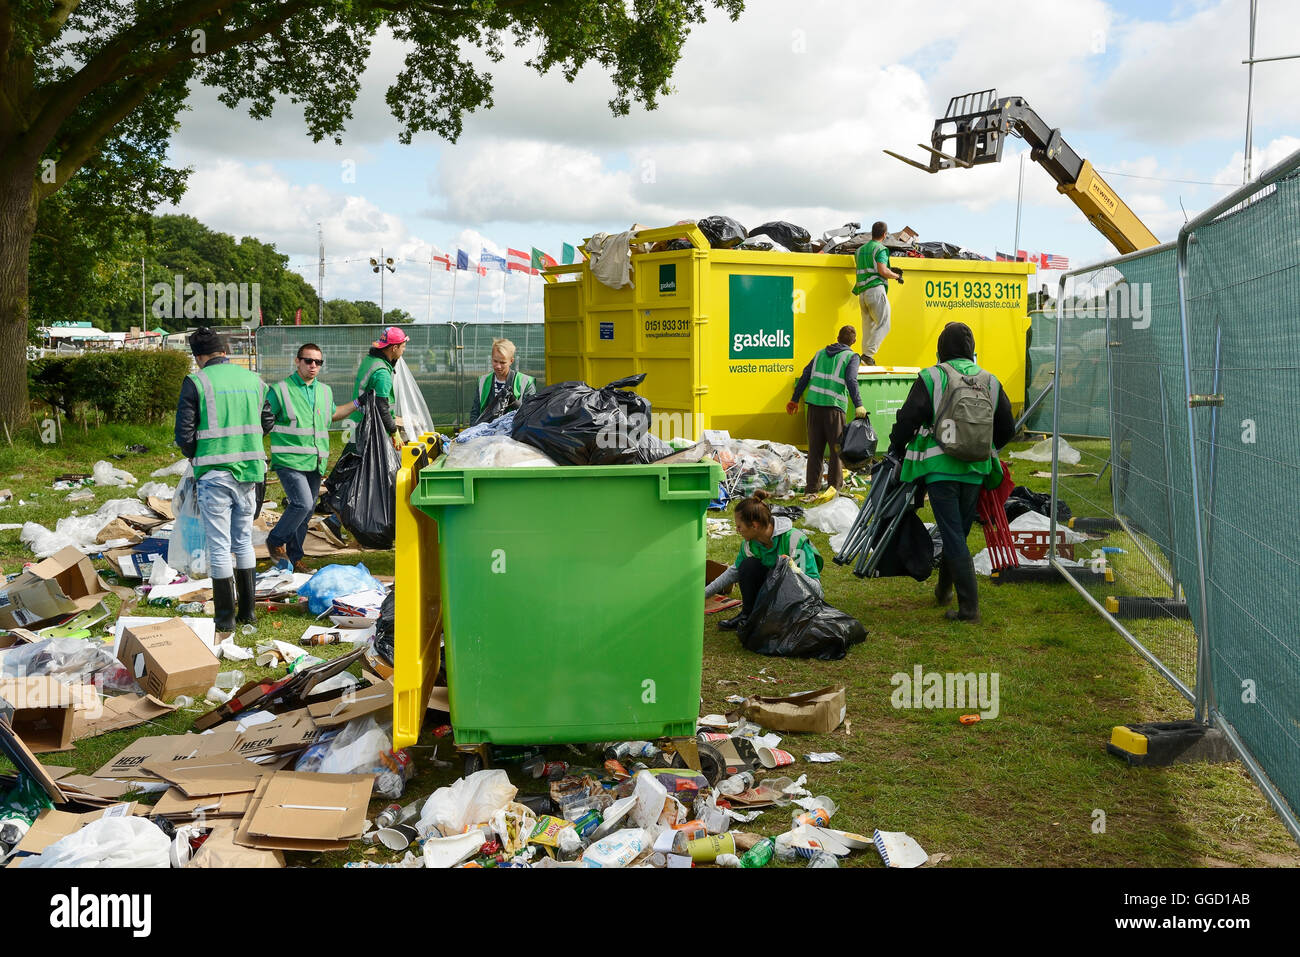 Carfest North, Bolesworth, Cheshire, UK. 31st July 2016. One of the waste collection areas at the festival. Stock Photo